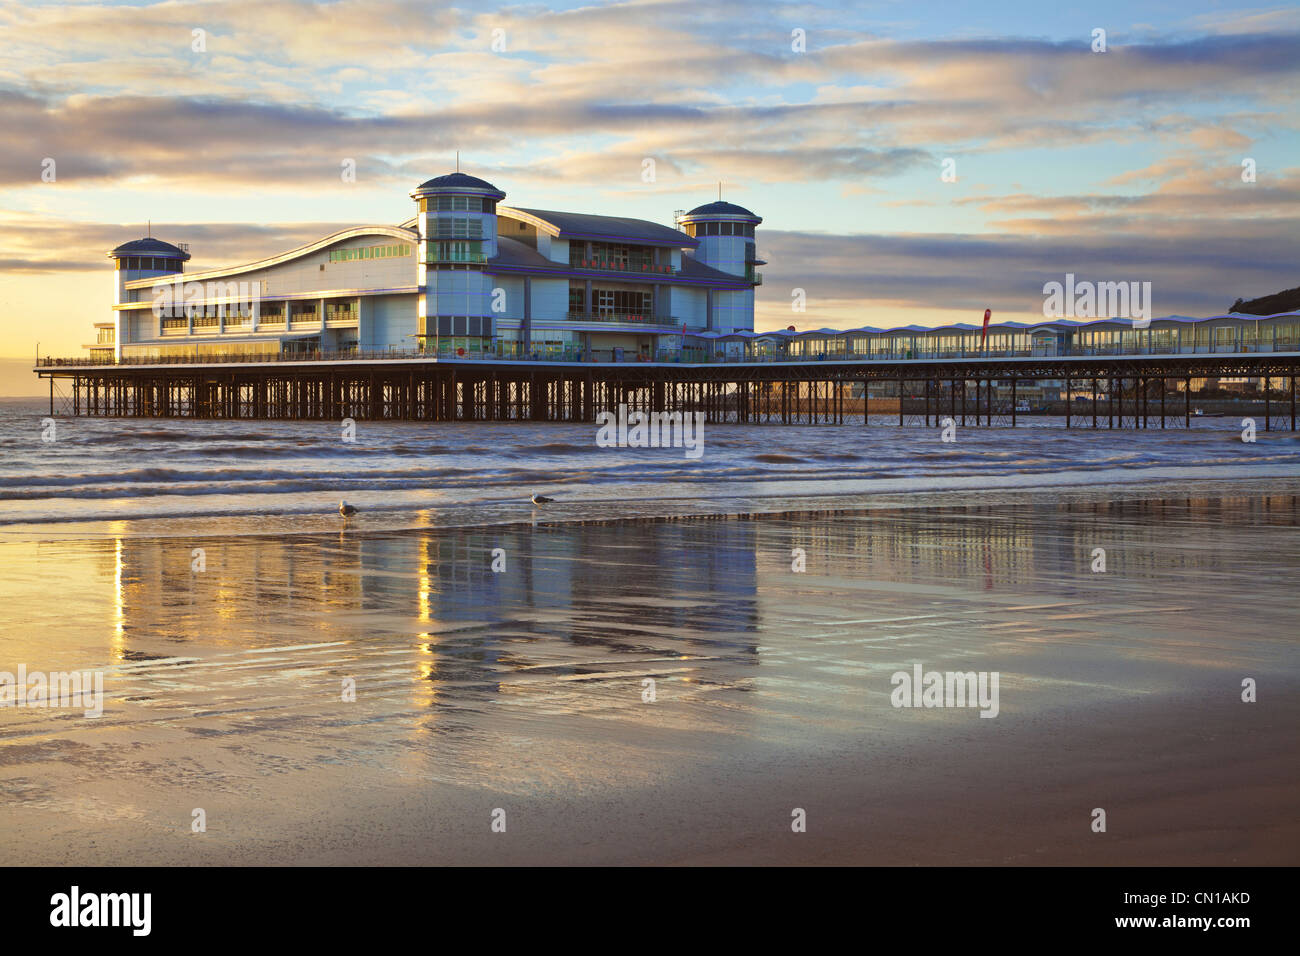 Golden evening light falls on the Grand Pier at Weston-Super-Mare, Somerset, England, UK reflected in the wet sand at high tide. Stock Photo